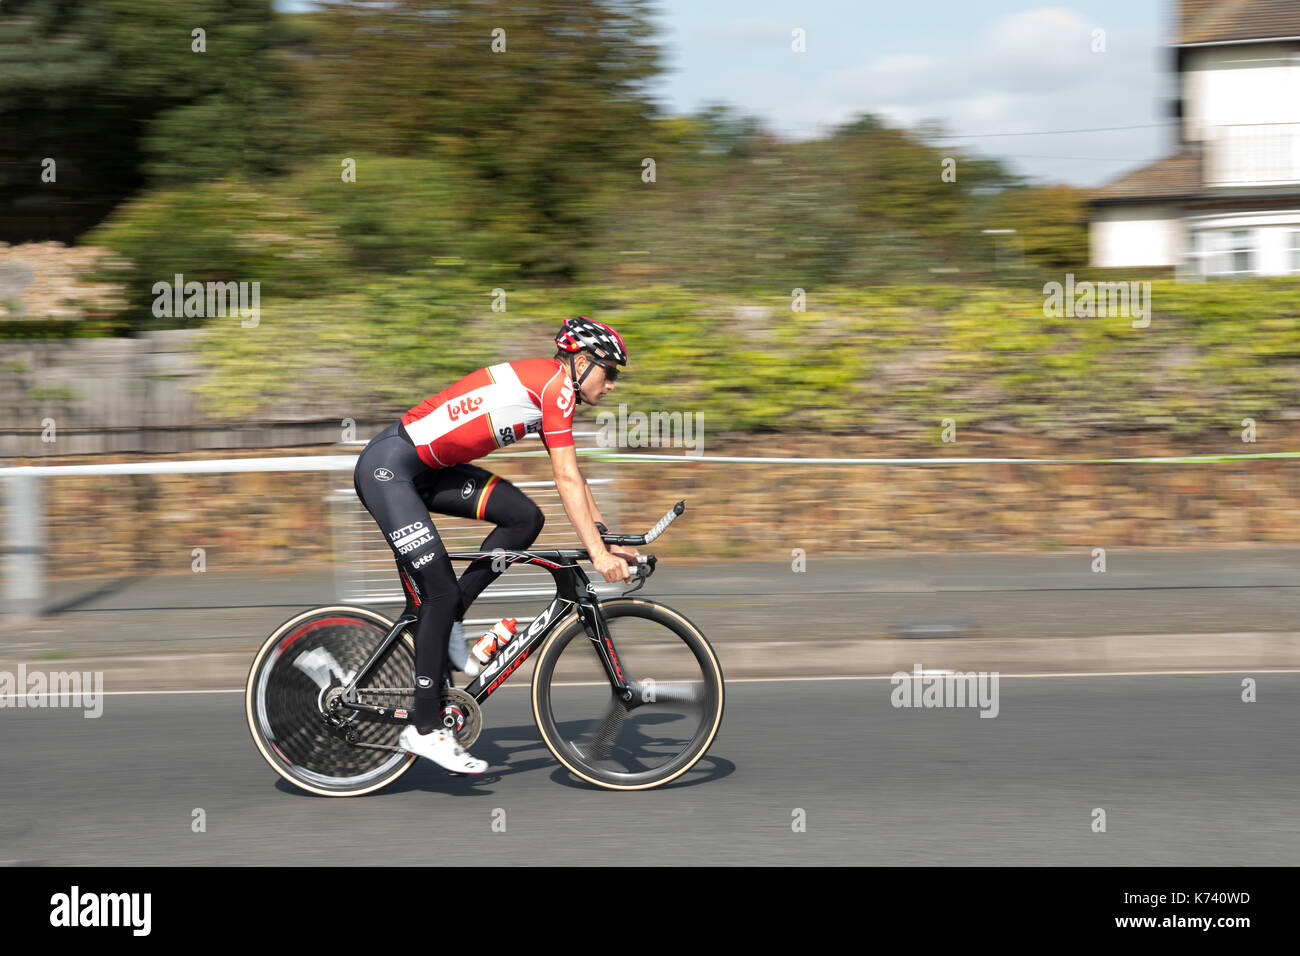 Cyclist from Lotto Soudal cycling team warming up before Tour of Britain cycle race 2017 stage 5 Clacton on sea. UK. Stock Photo